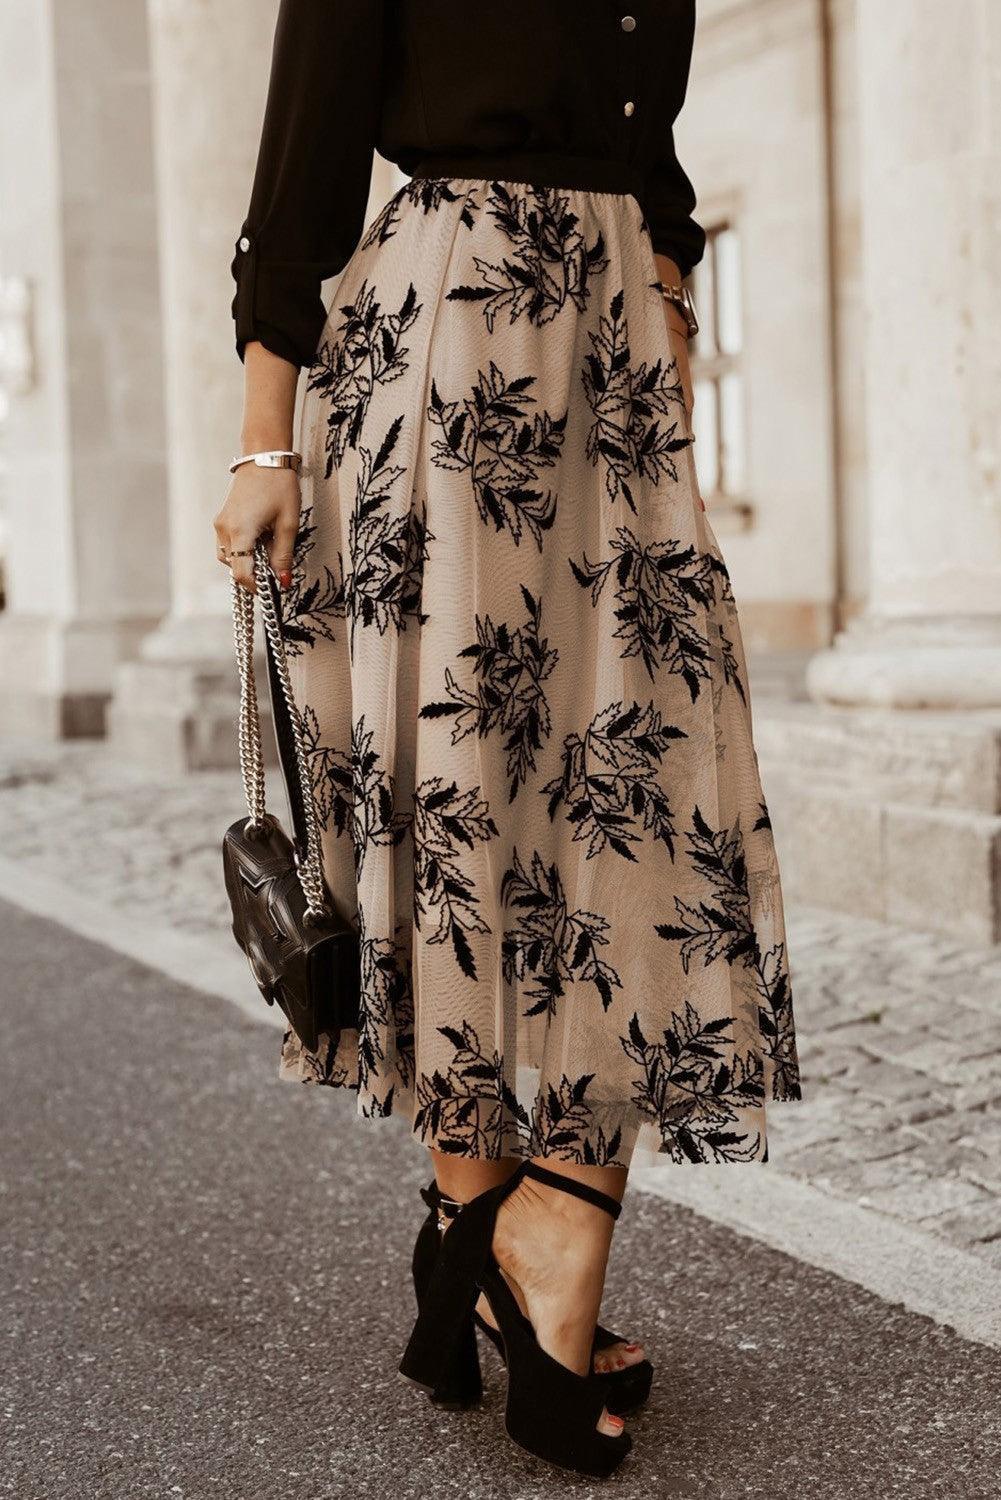 Apricot Floral Leaves Embroidered High Waist Maxi Skirt - Ninonine